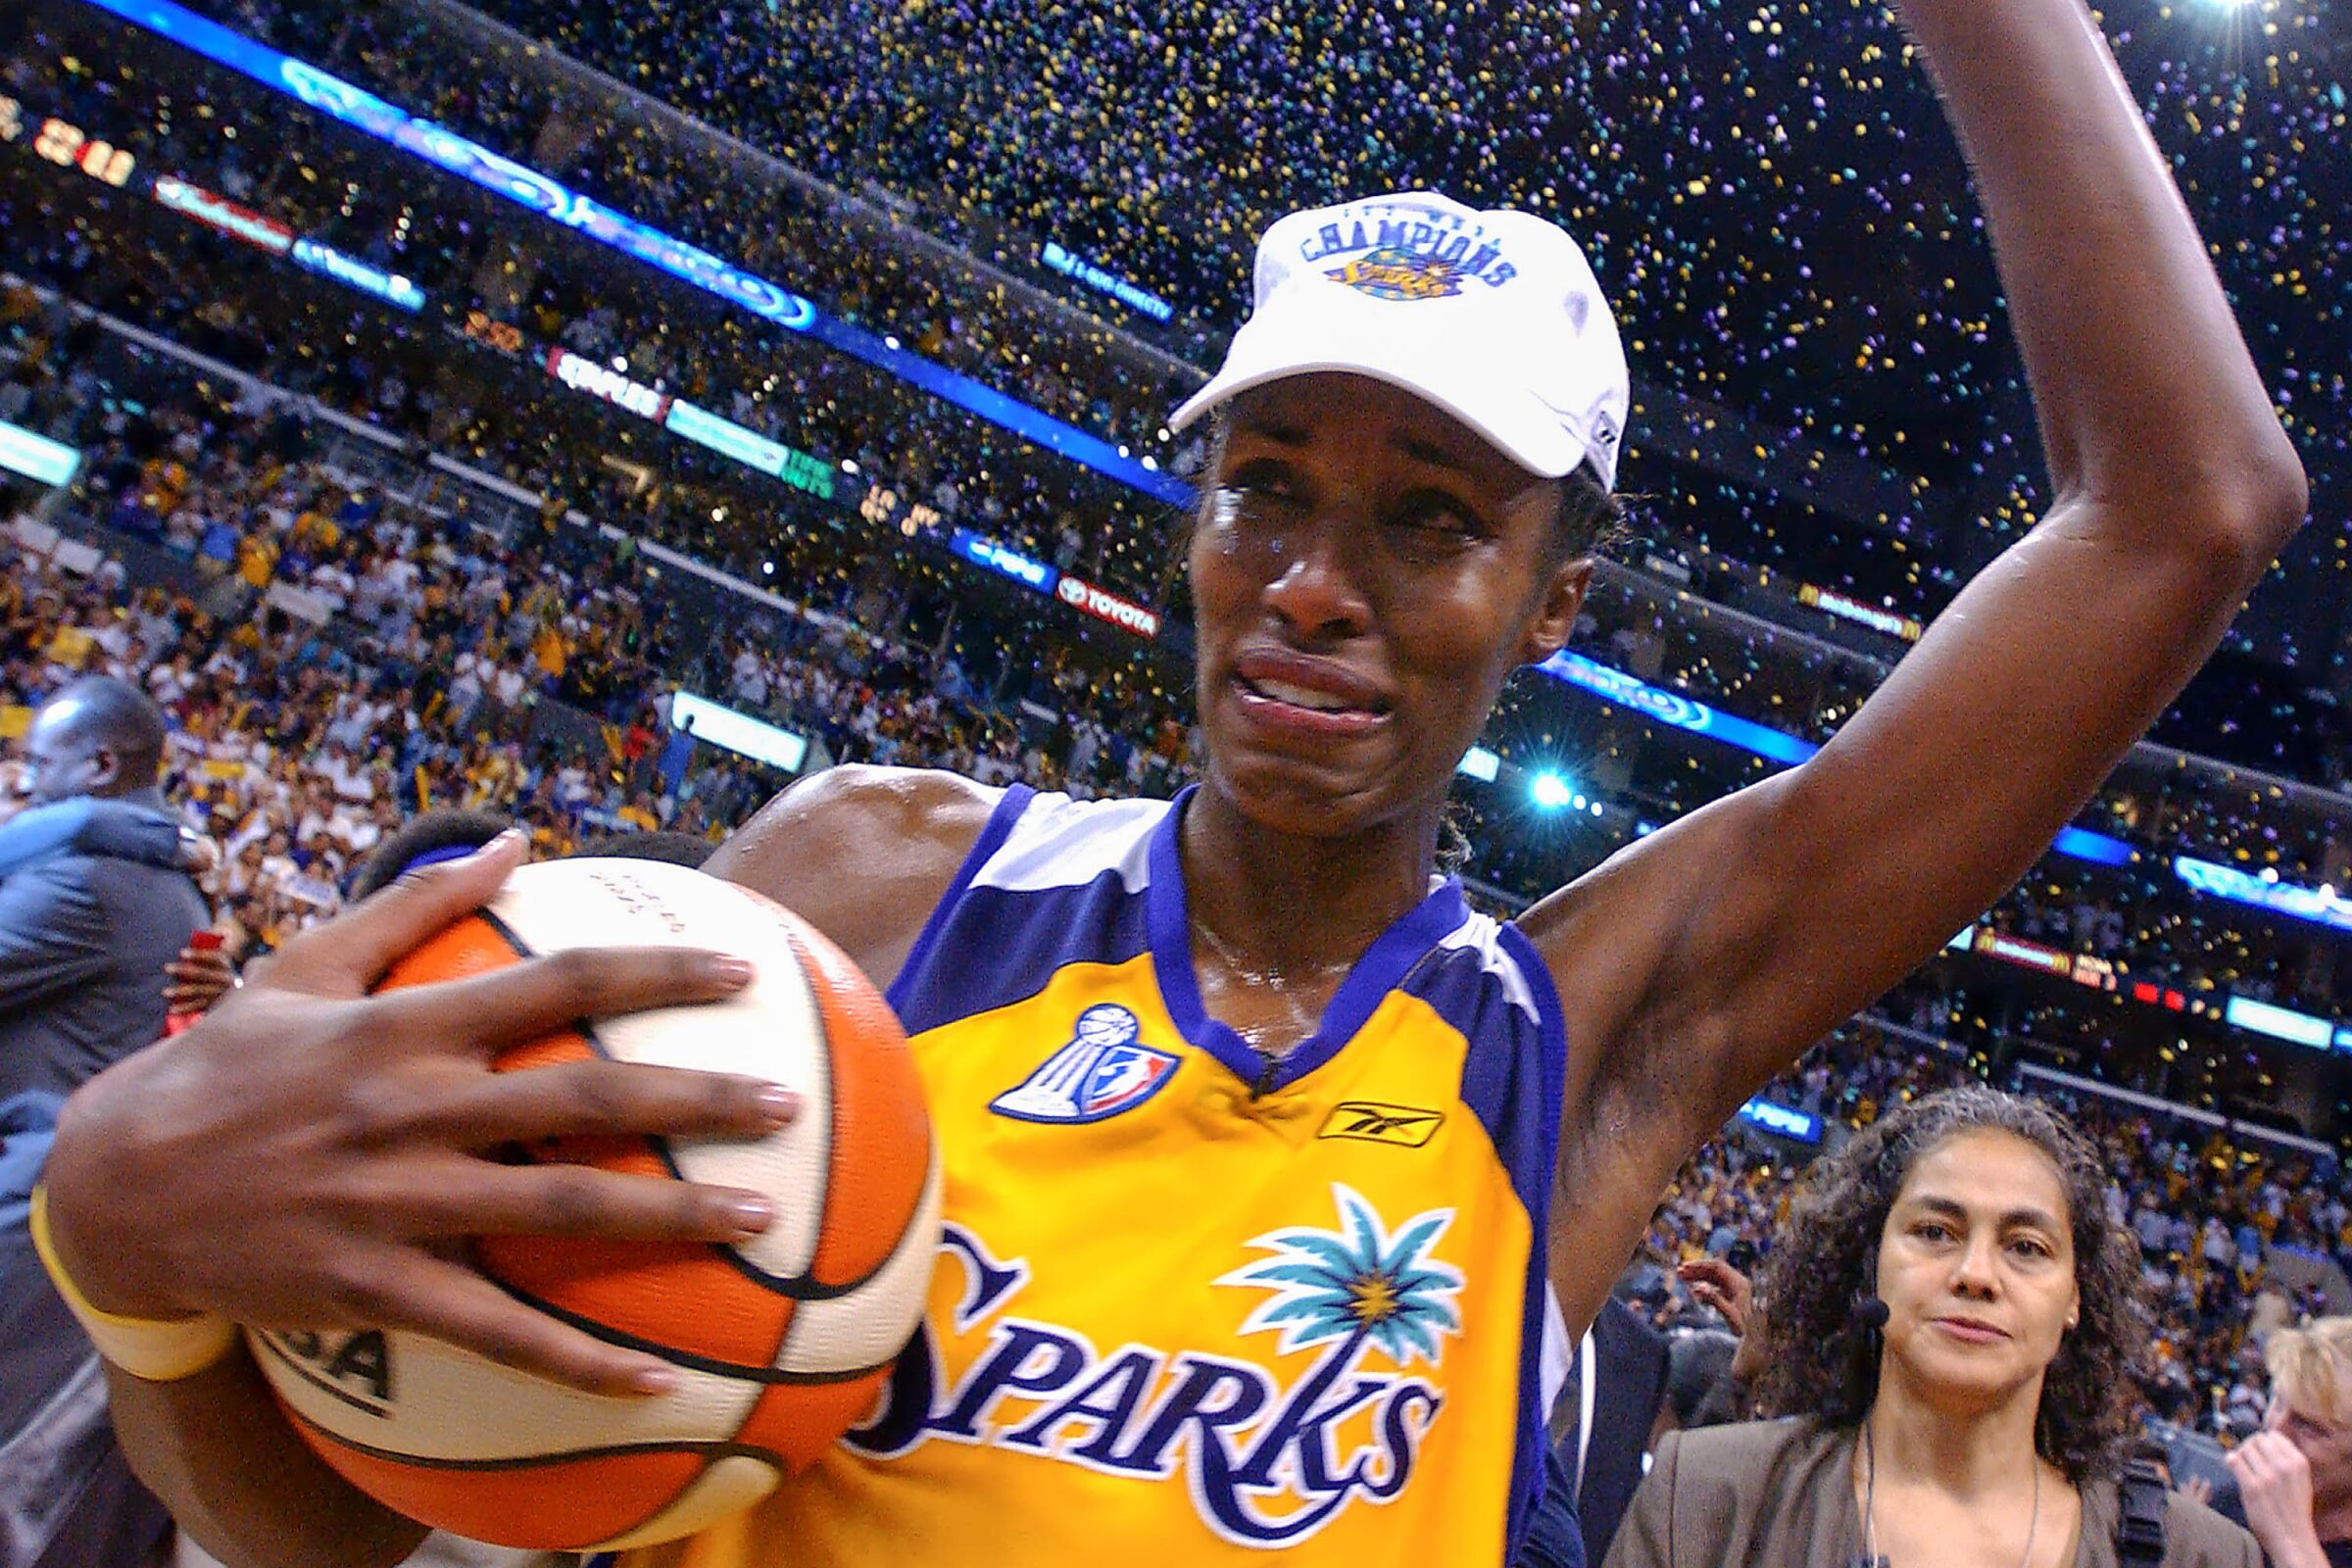 Los Angeles Sparks' Lisa Leslie celebrates a win against New York Liberty 69-66 in the WNBA Finals championship in 2002.